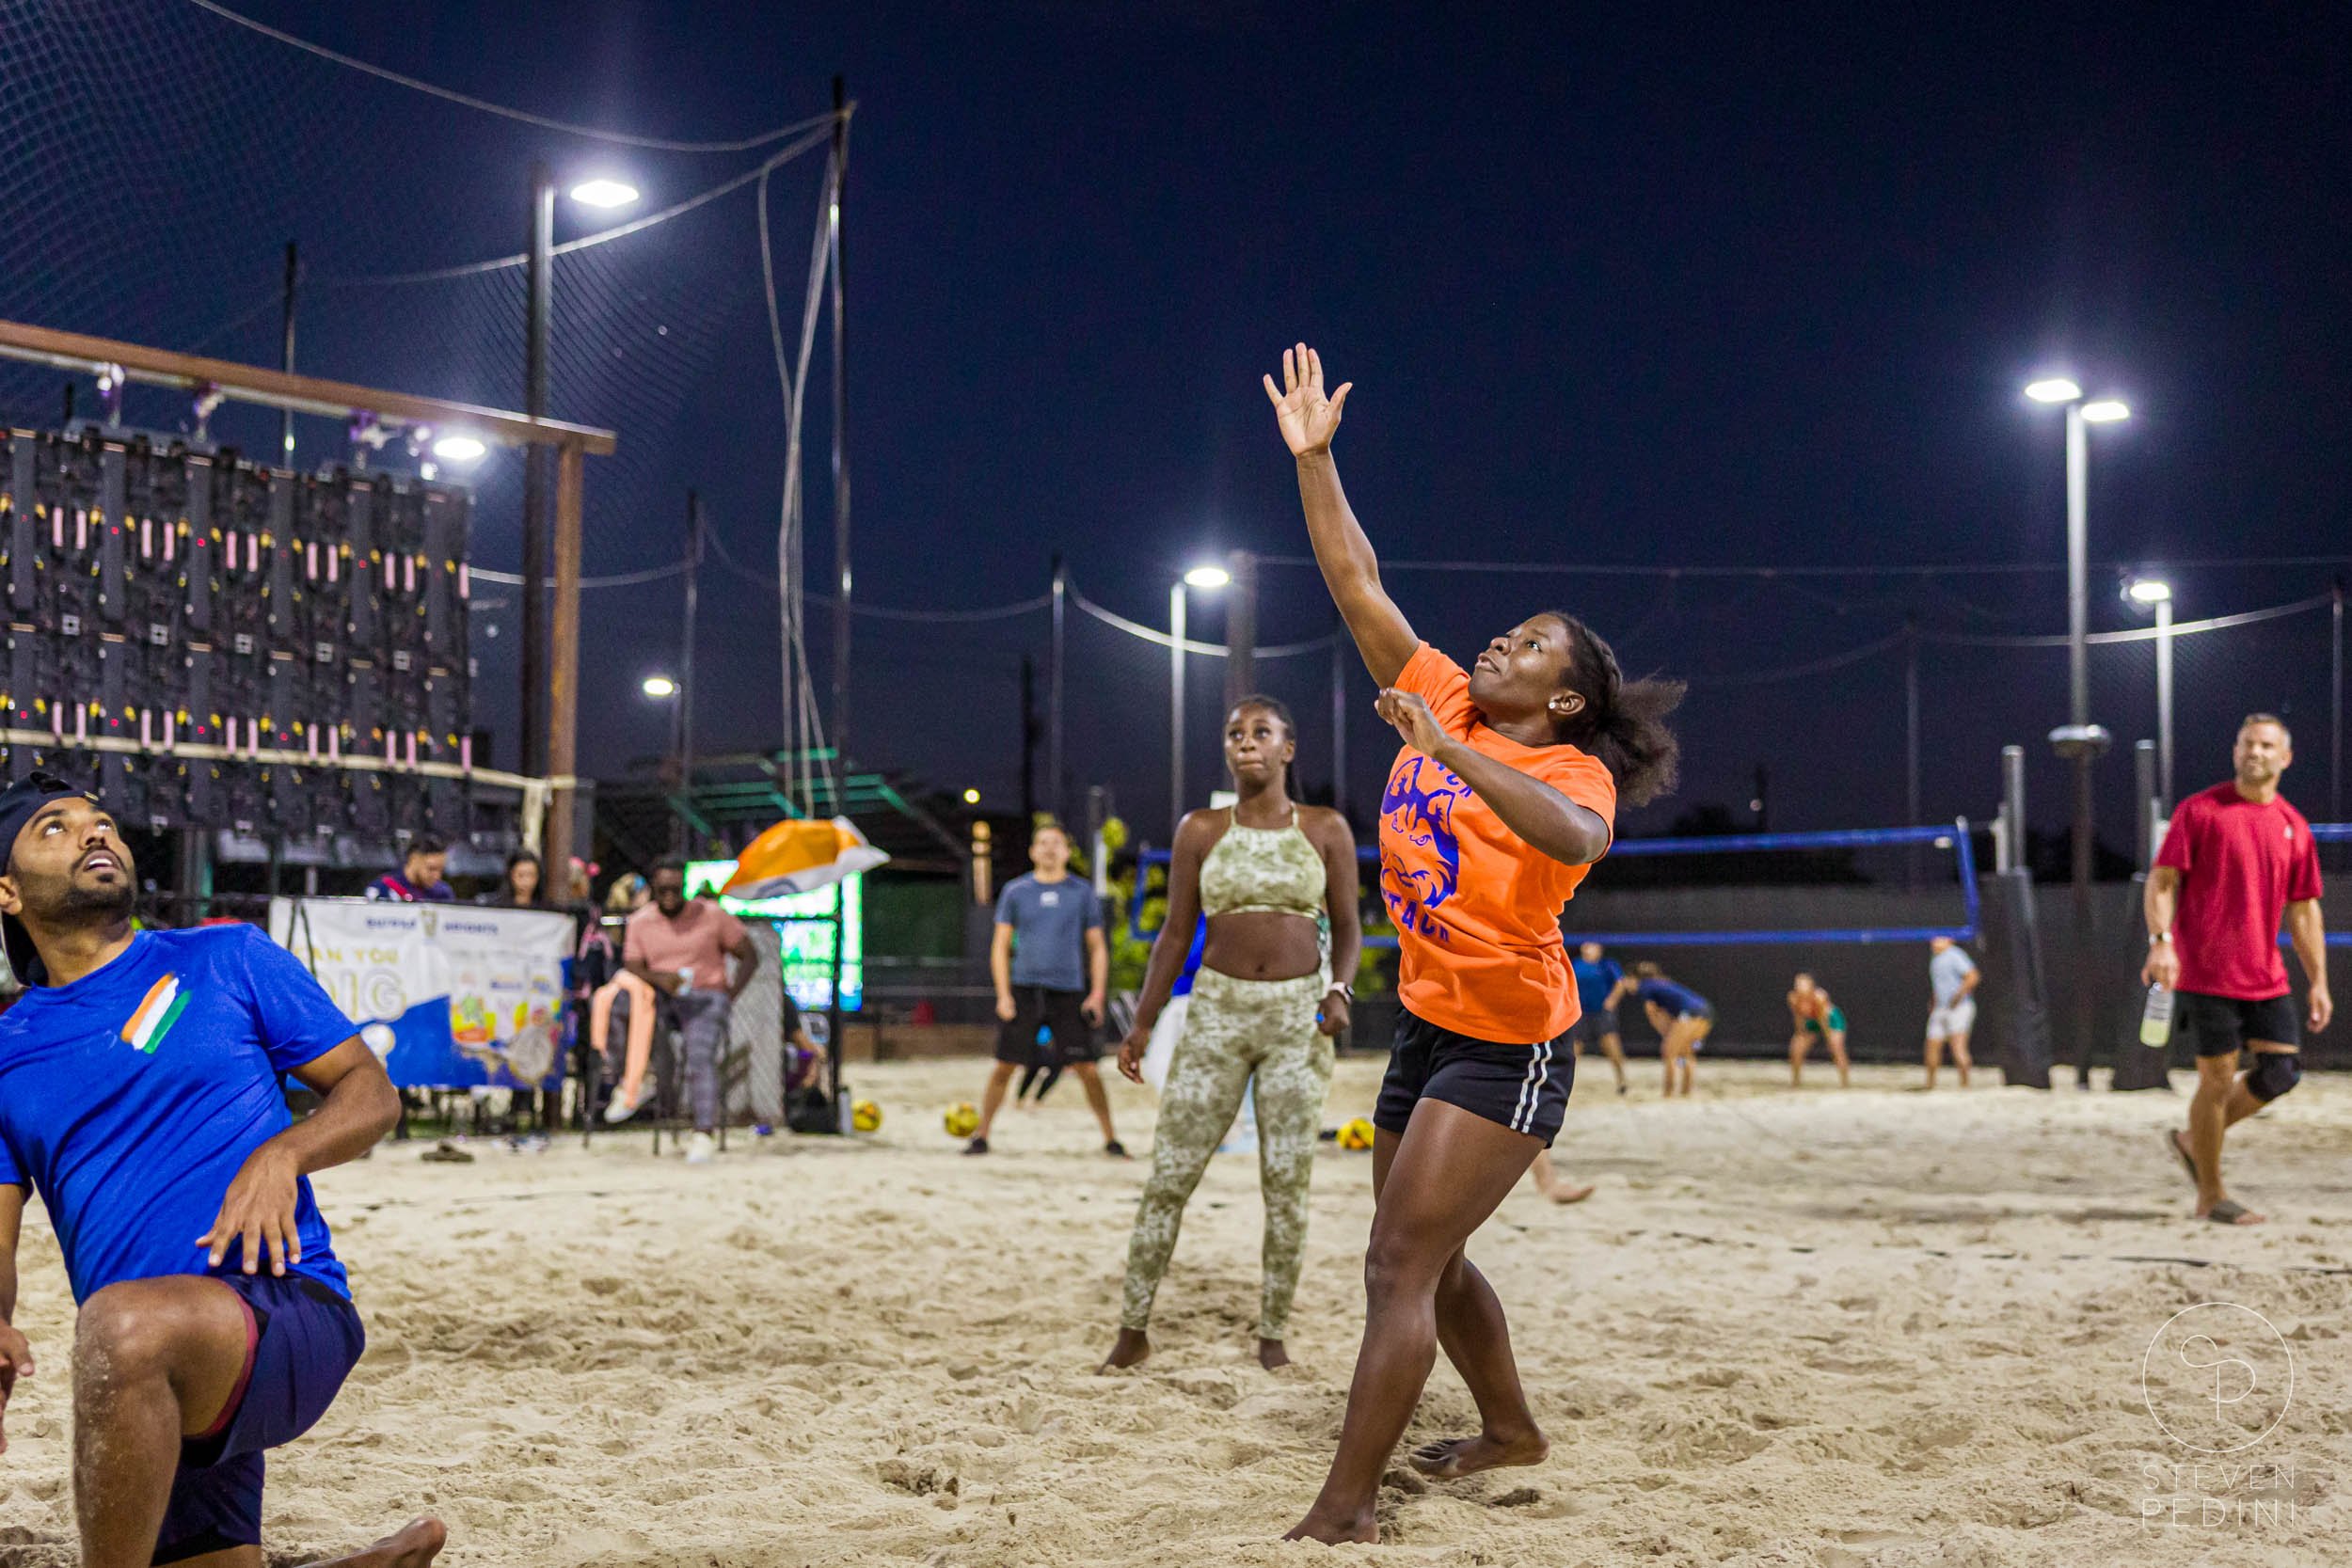 Steven Pedini Photography - Bumpy Pickle - Sand Volleyball - Houston TX - World Cup of Volleyball - 00347.jpg